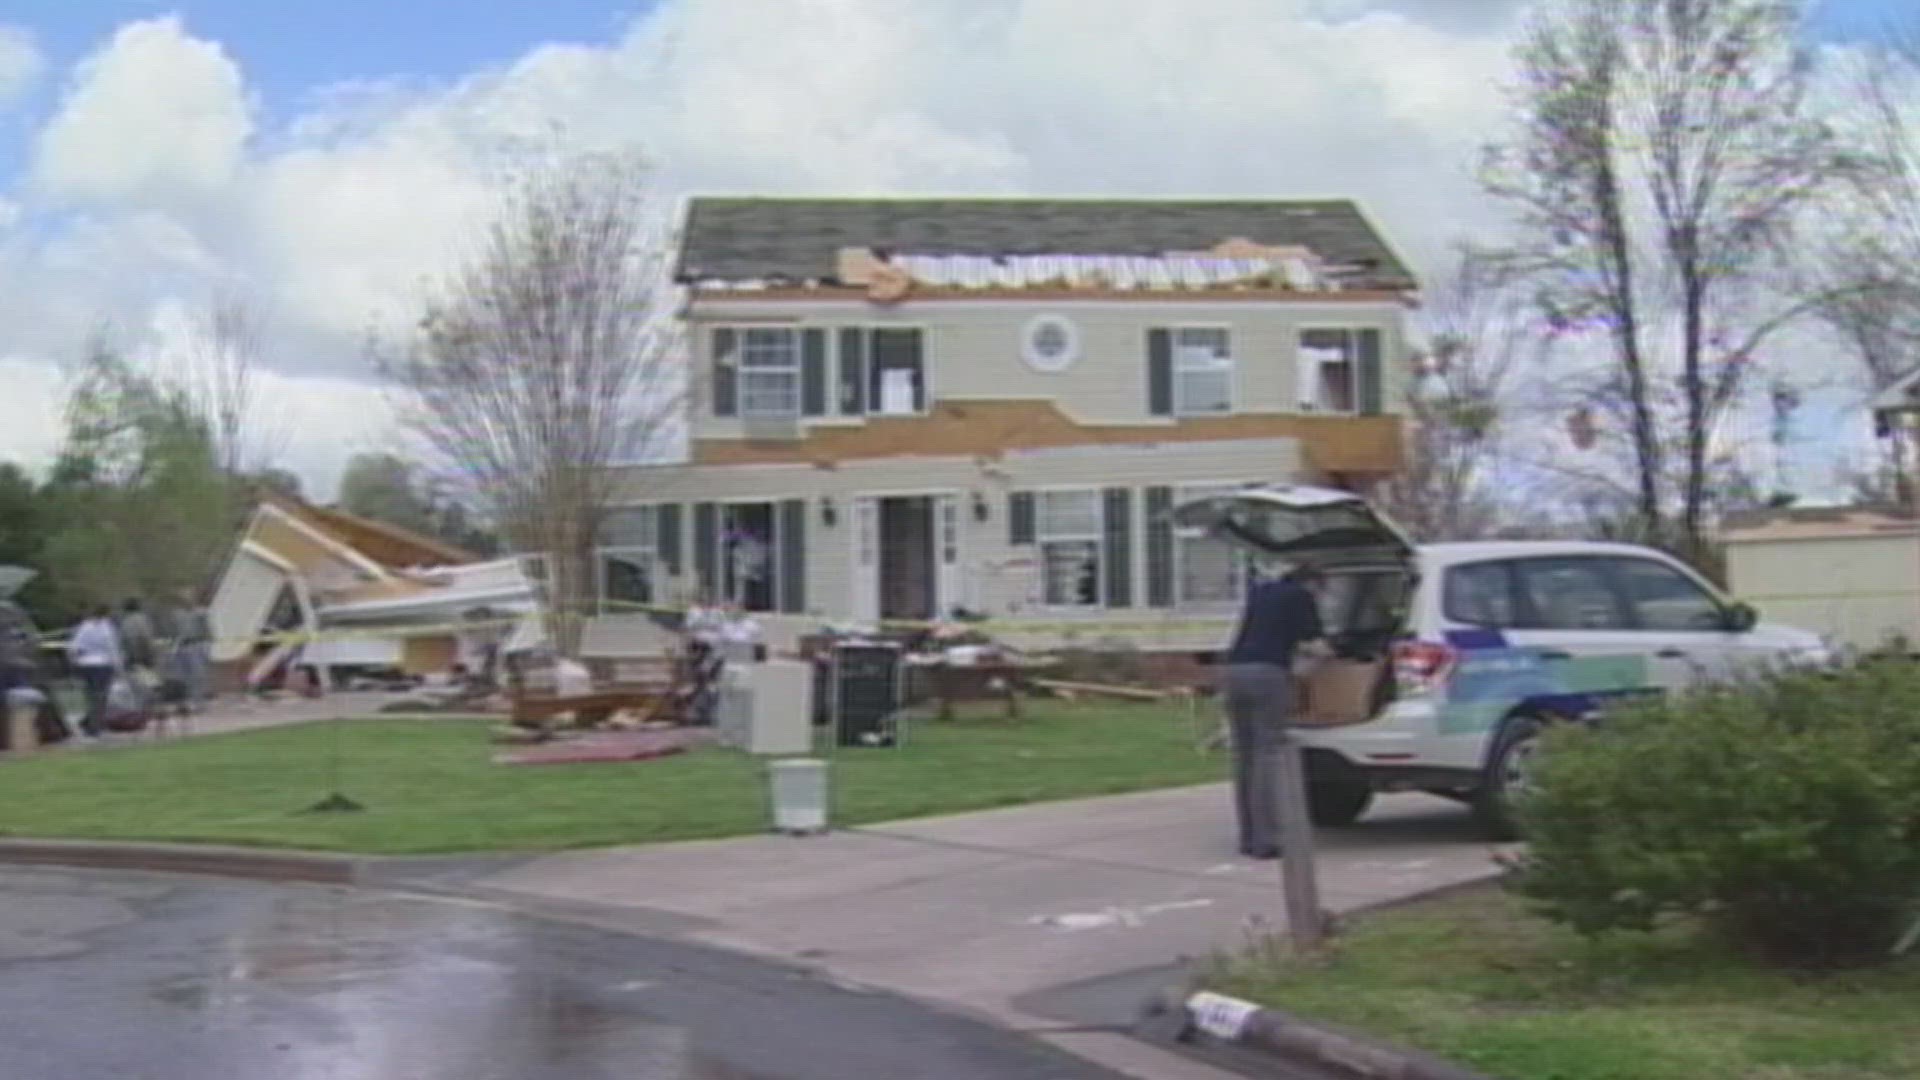 On March 28, 2010, the state of North Carolina experienced a tornado outbreak.